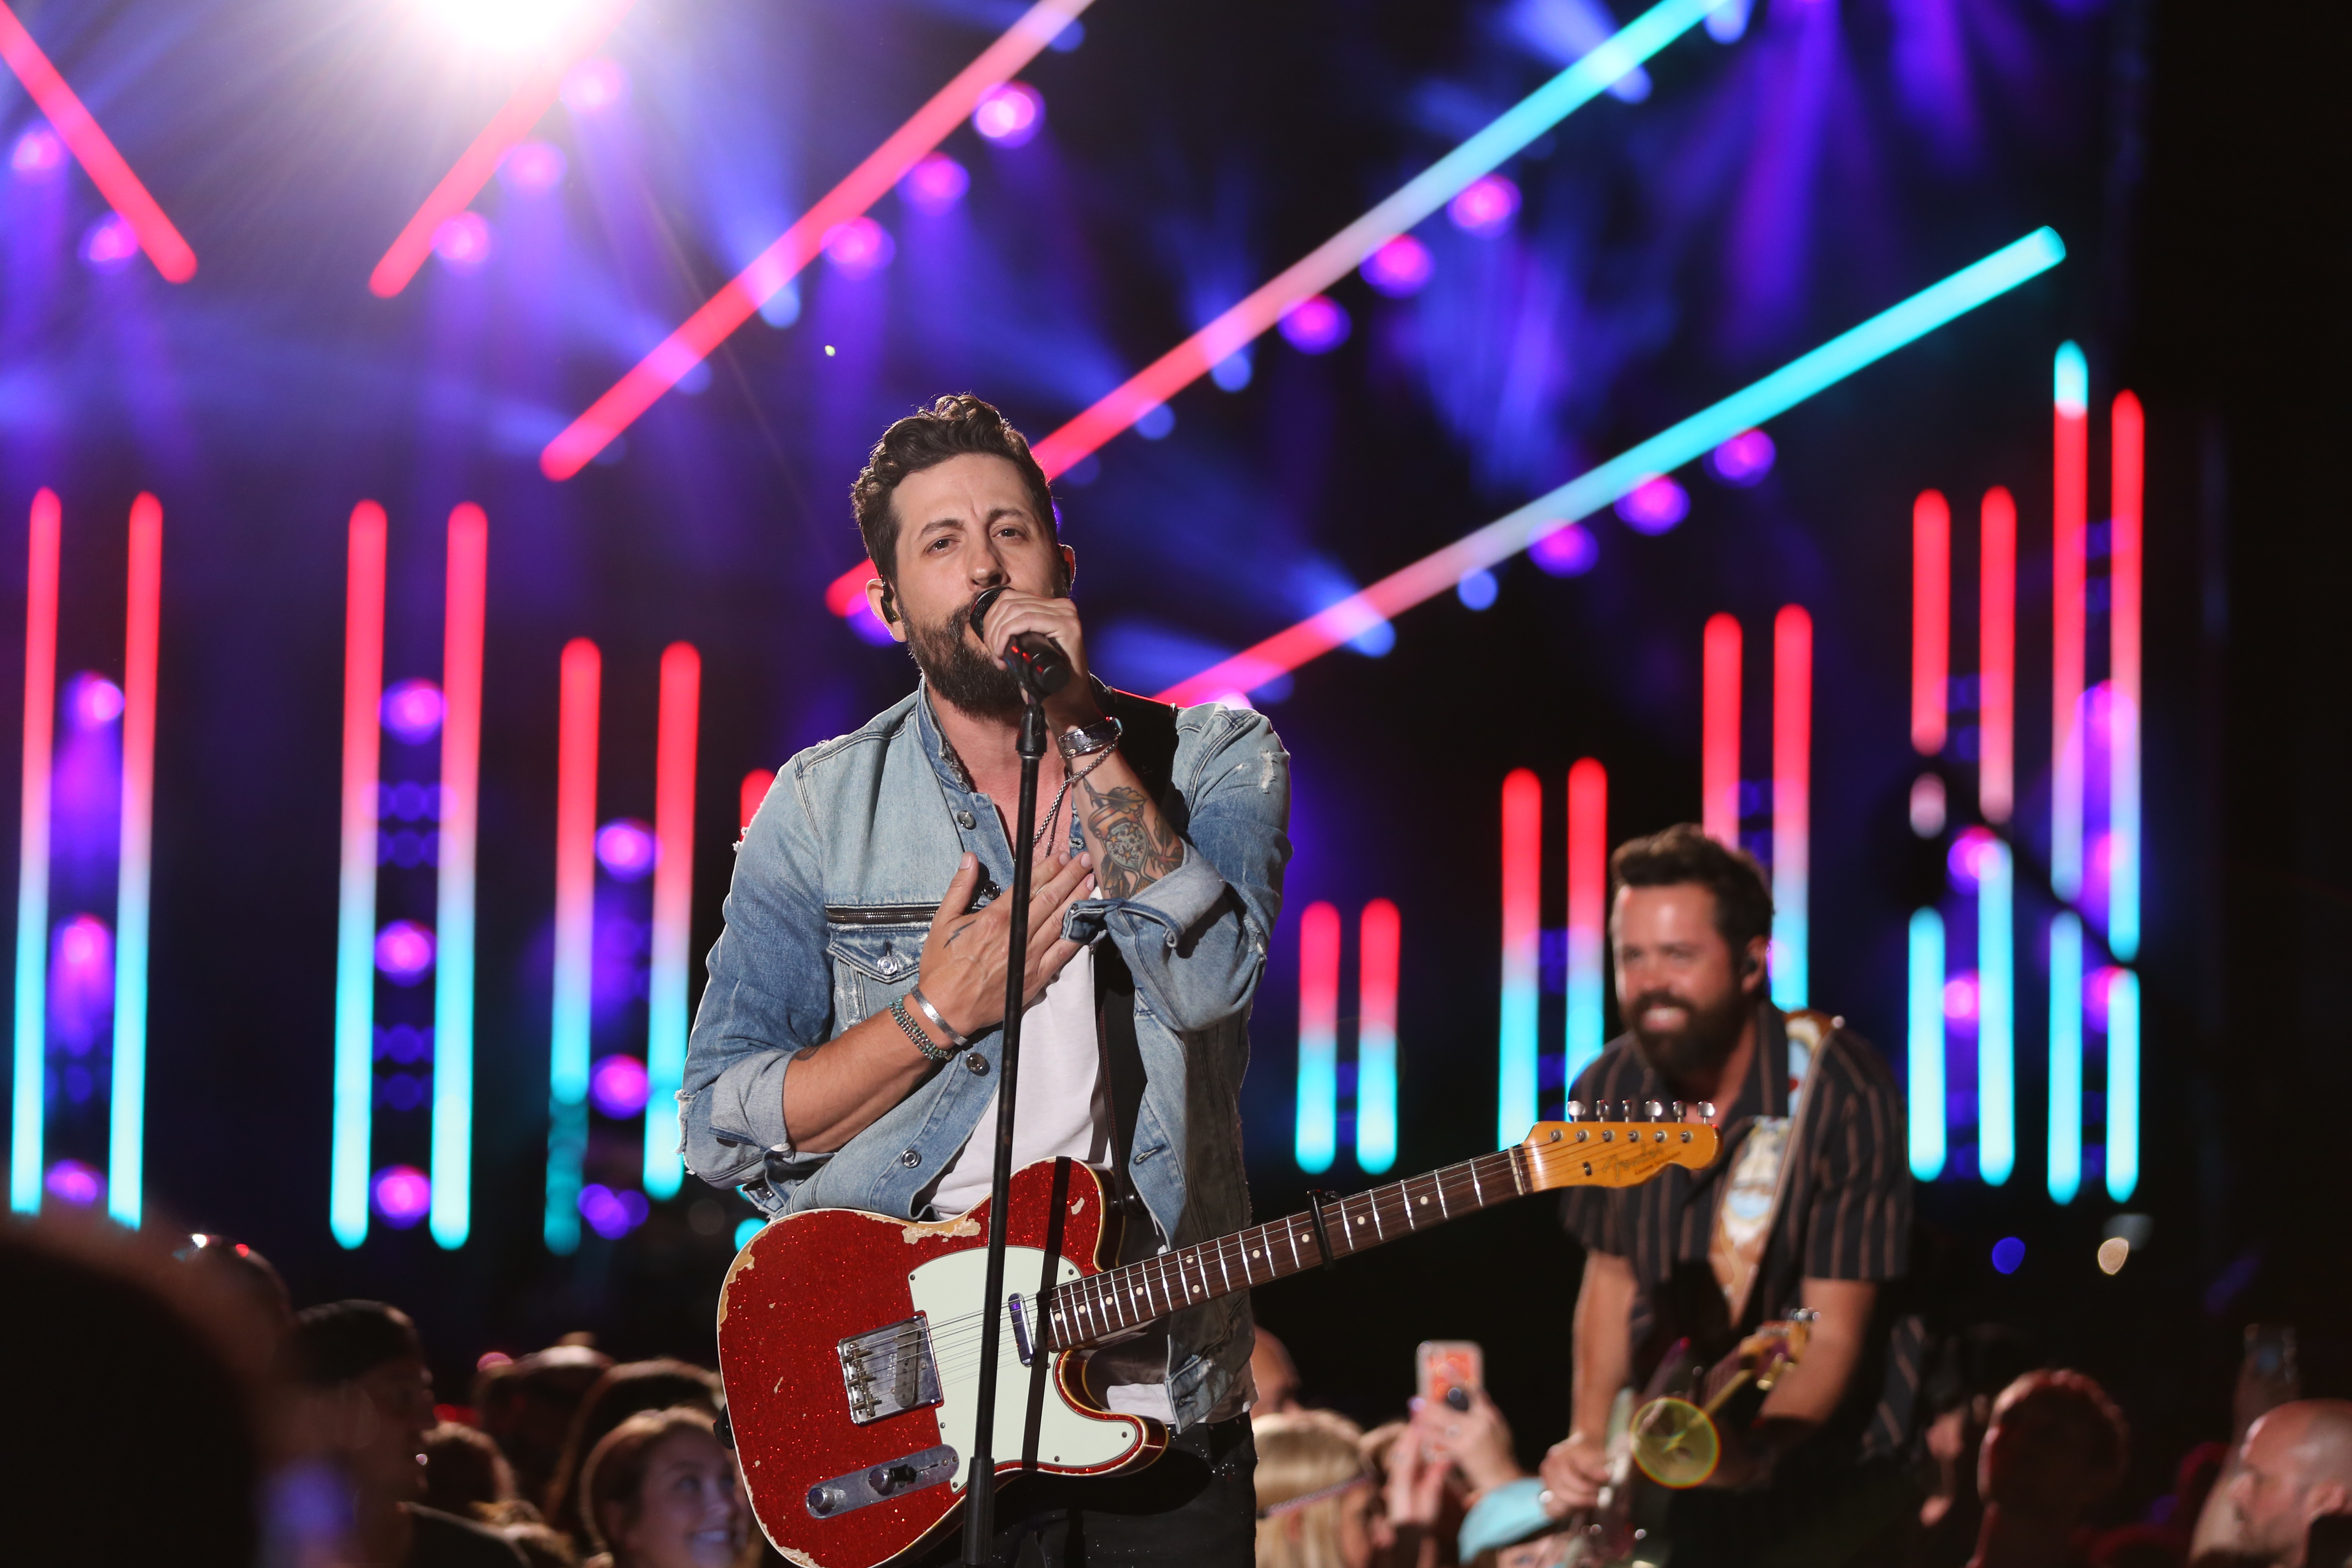 Old Dominion Bring “Make It Sweet” Tour to the Jersey Shore with Sold-Out Performance